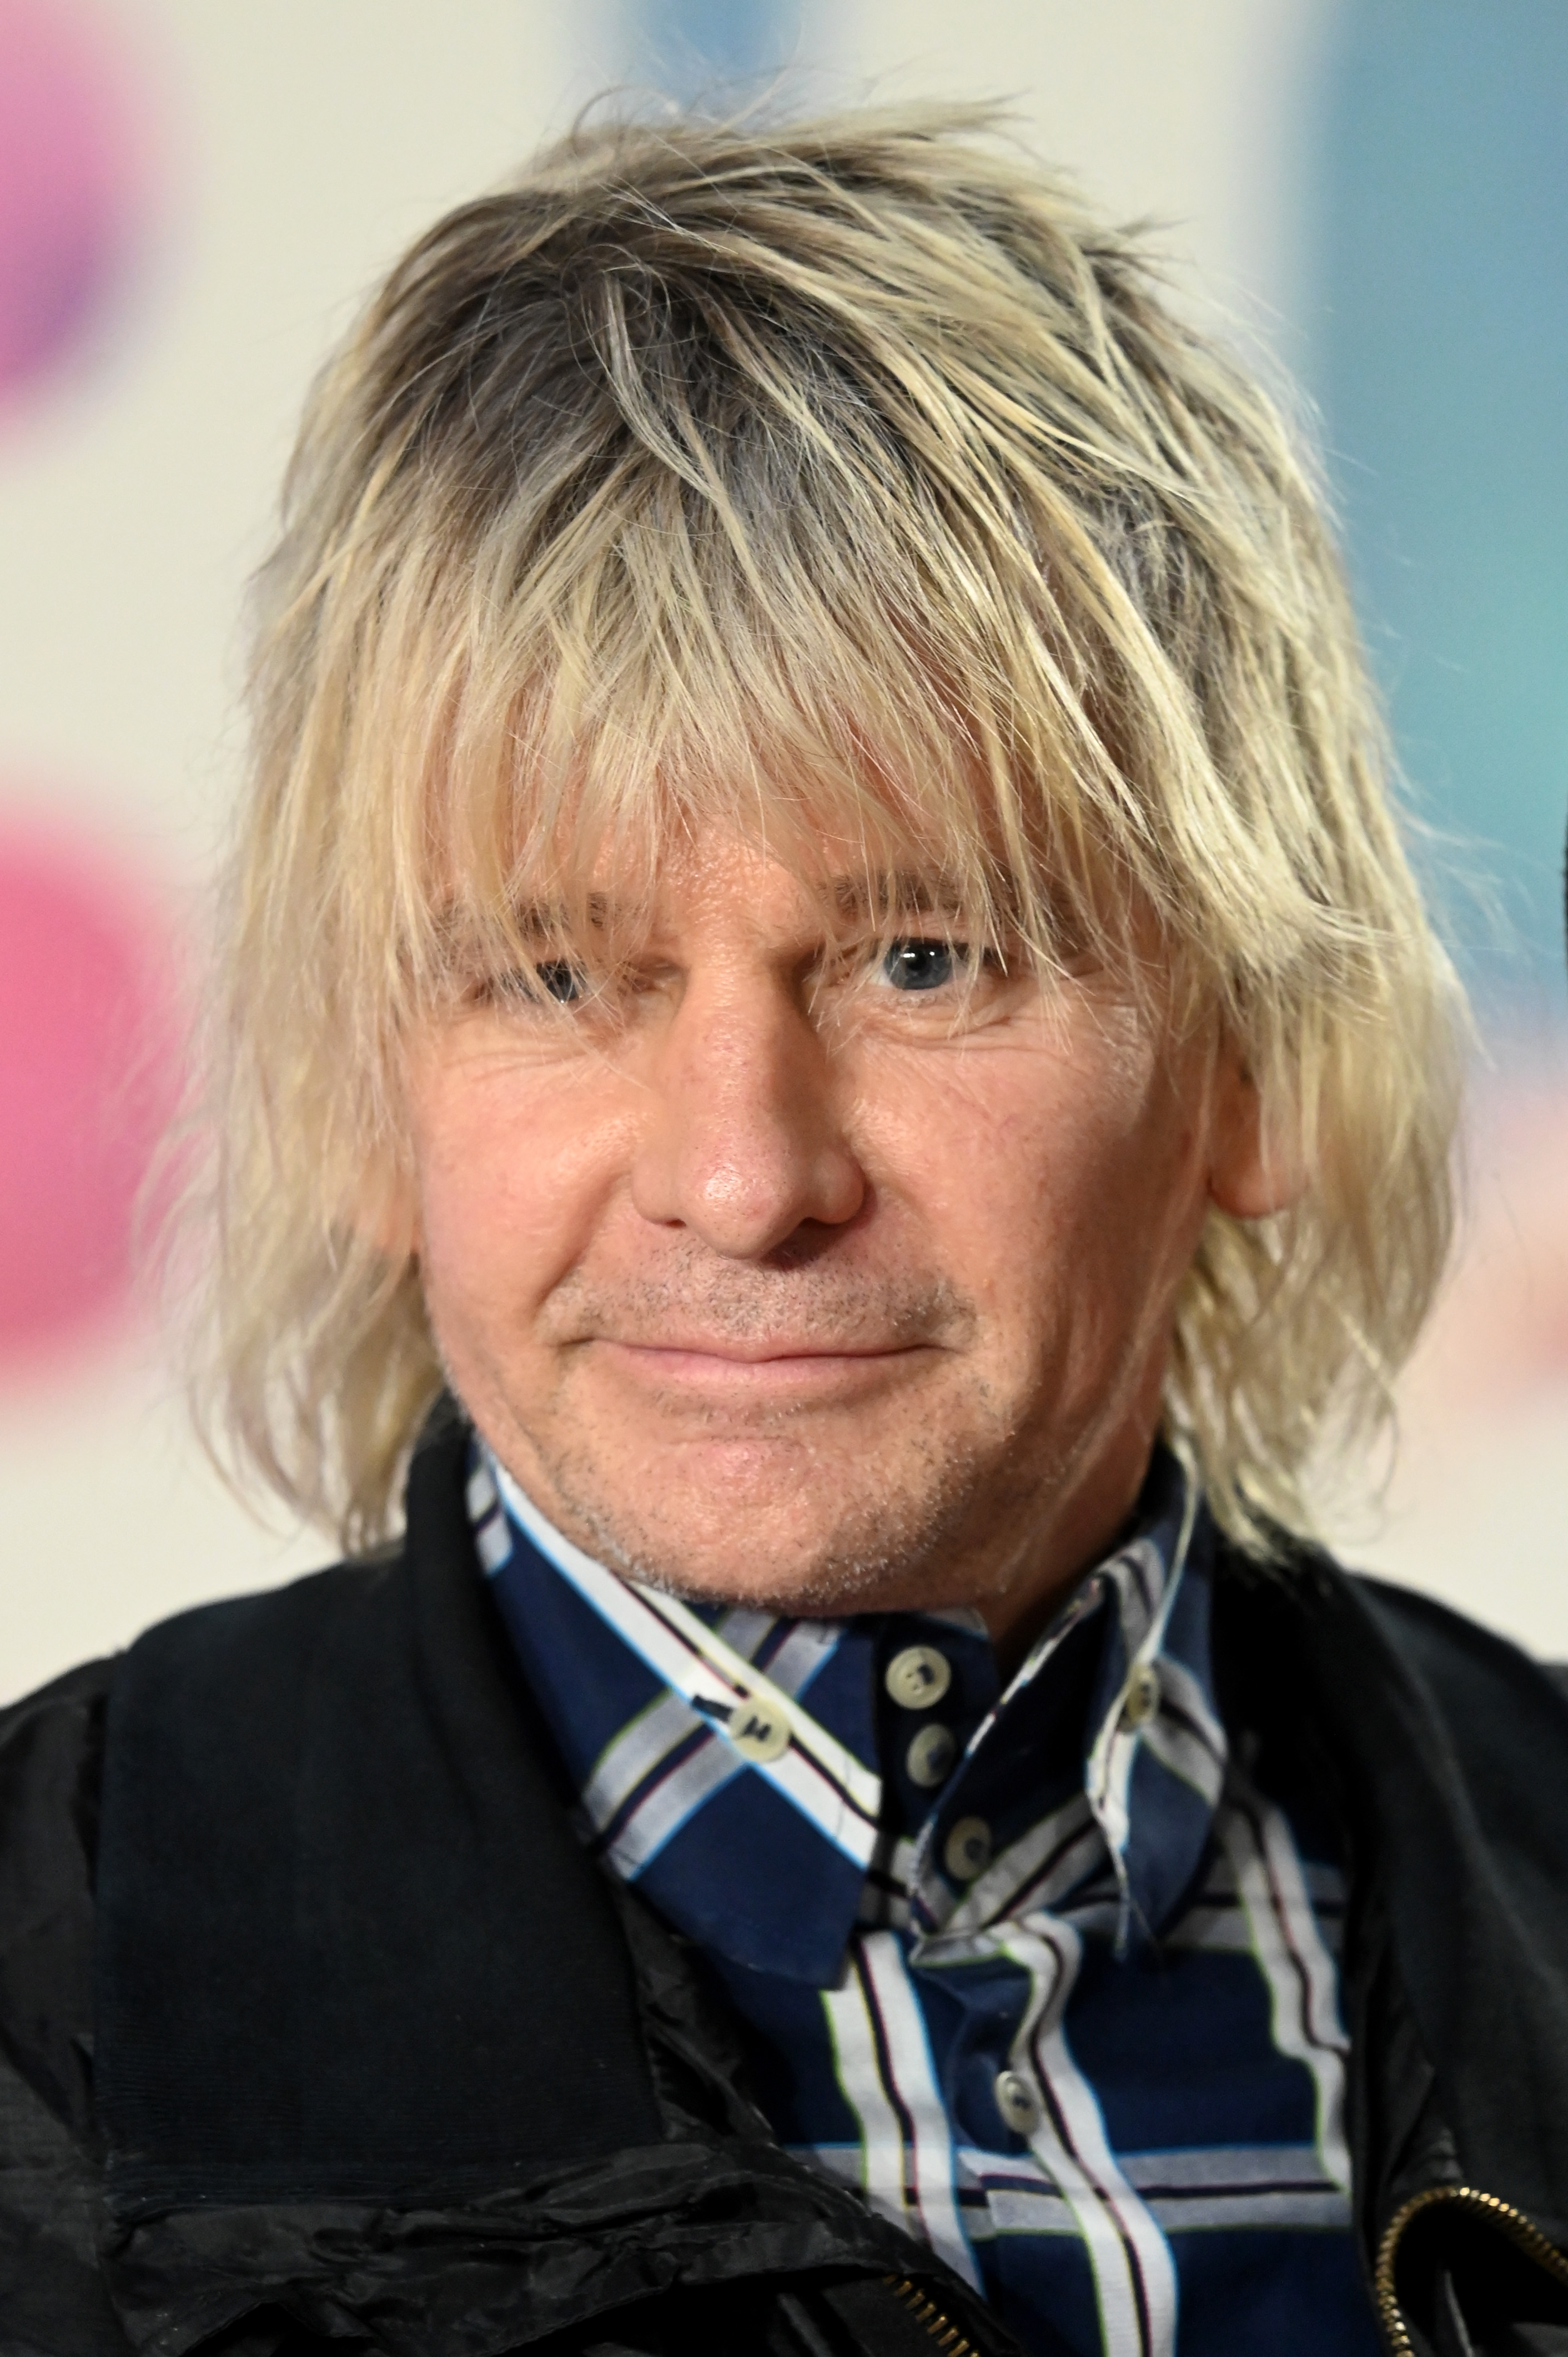 Zak Starkey at the "Moonage Daydream" London premiere on September 5, 2022, in London, England | Source: Getty Images